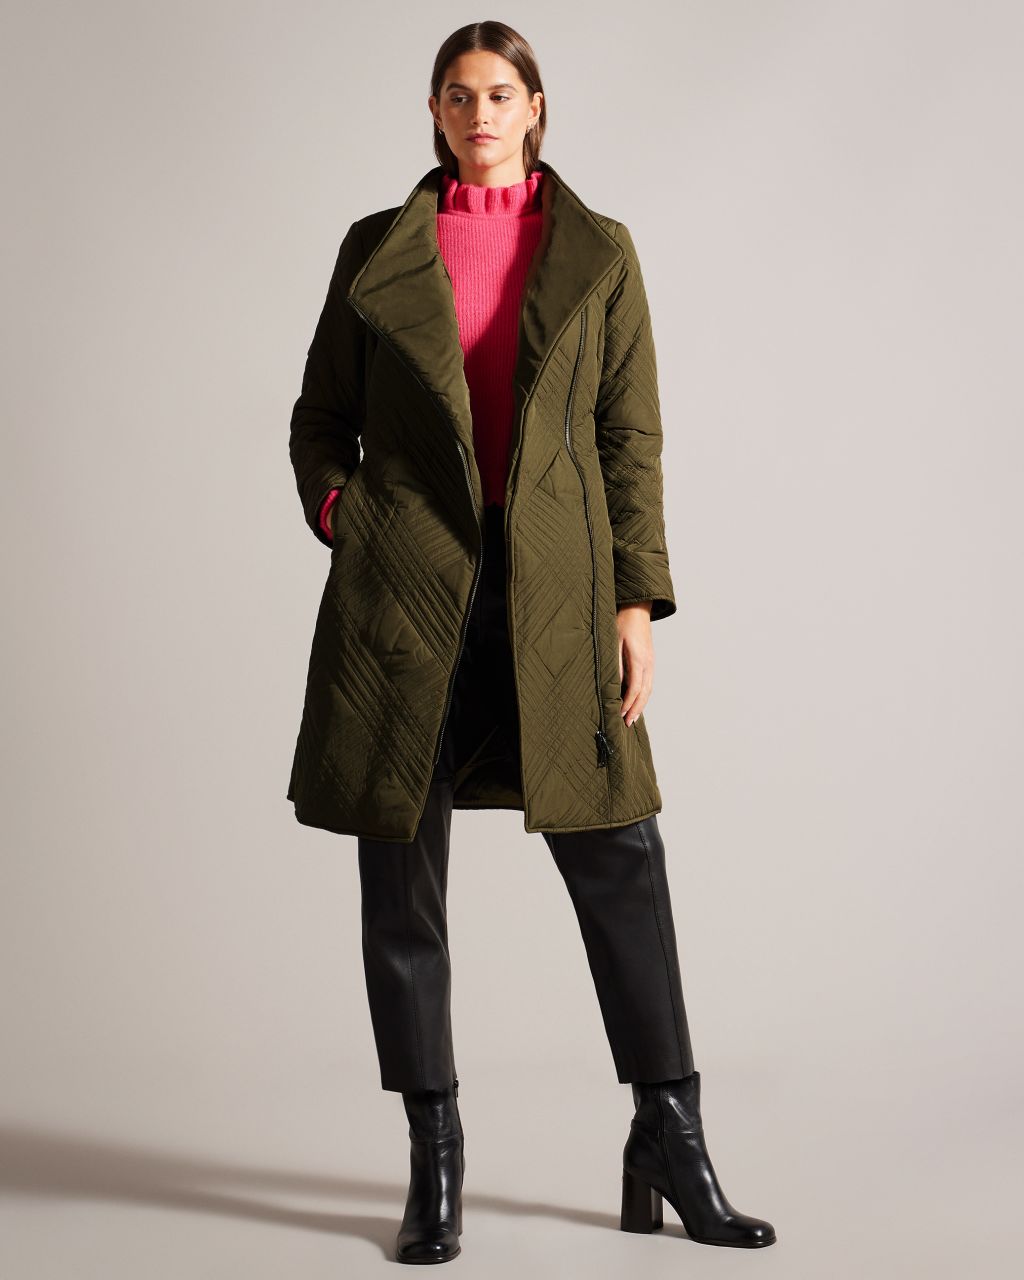 Women's Midi Quilted Wrap Coat With High Collar in Khaki, Rosemae product